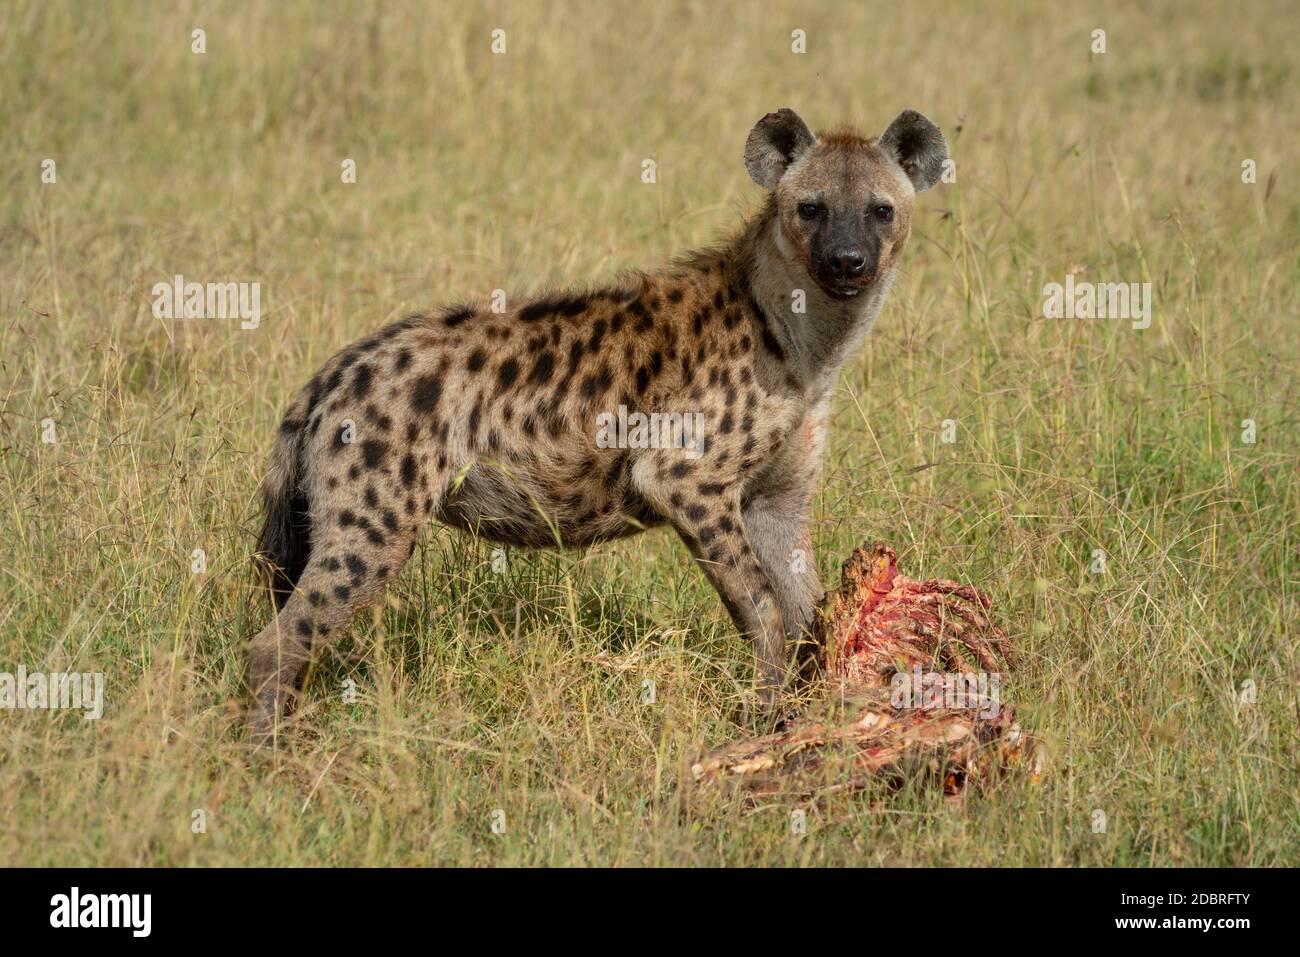 Spotted hyena stands in grass with bones Stock Photo